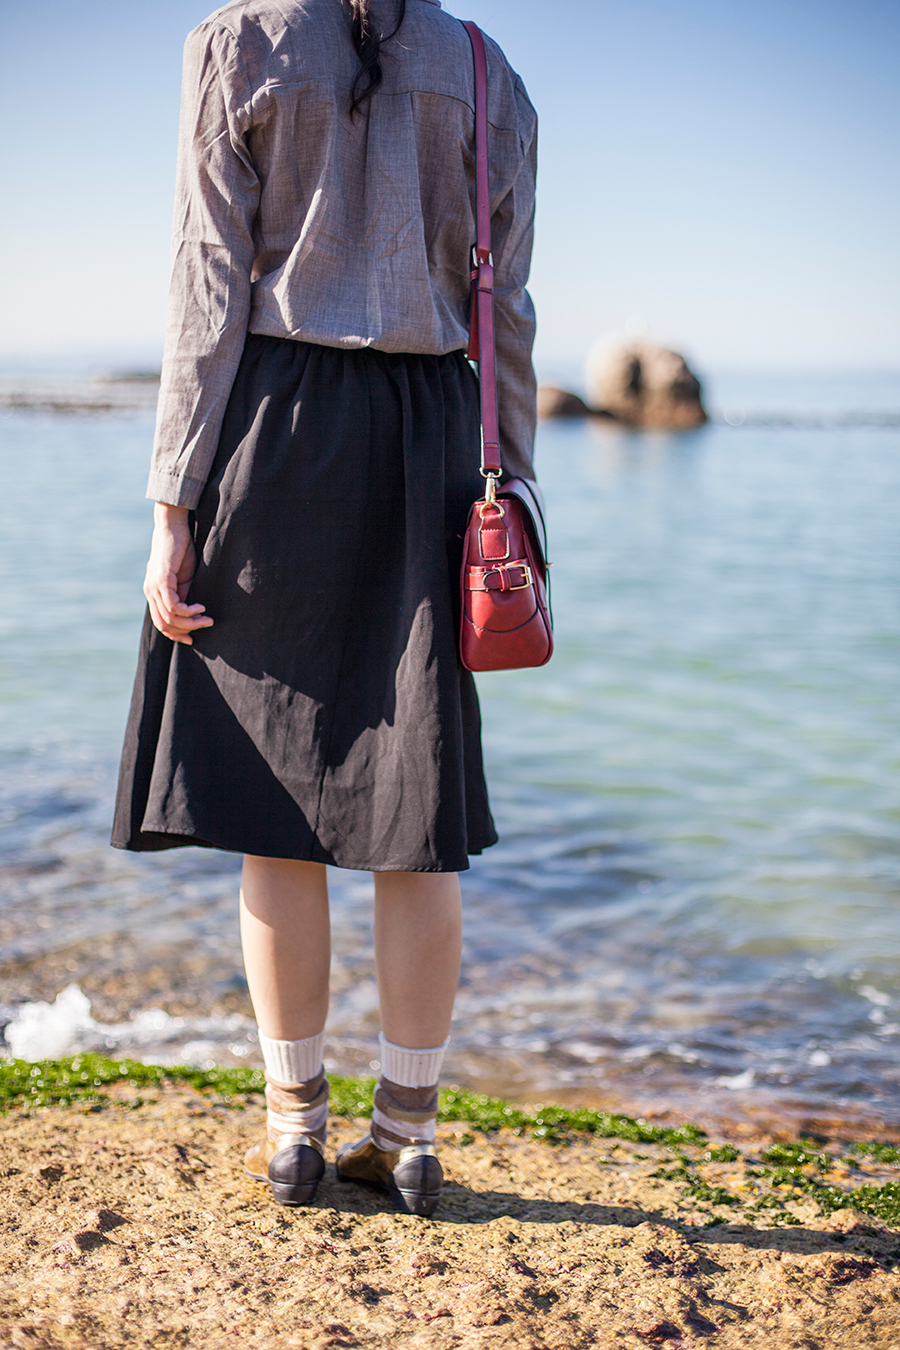 Outfit at Boulders Beach, Table Mountain National Park, Cape Town, South Africa: Dressgal grey linen shirt, Dressgal red satchel handbag, Lowry's Farm black midi skirt with pockets, Anonymous Ism patchwork crew socks via Shopbop, Something Borrowed black & gold pointed flats via Zalora.